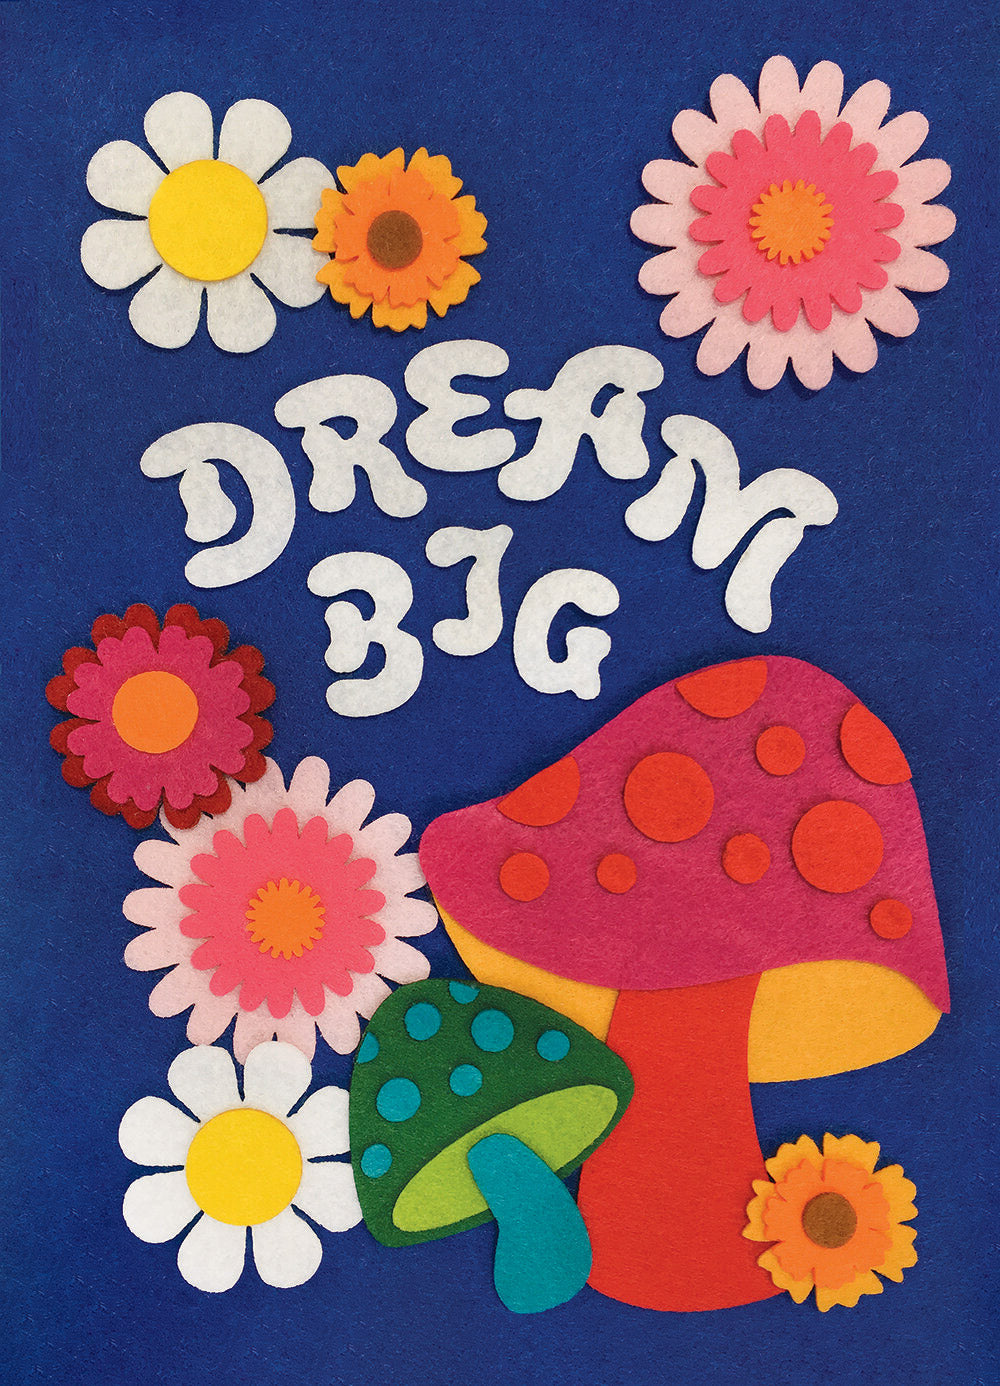 A felt collage illustration depicting a collection of colourful flowers and the words “Dream Big” in white retro-style text.